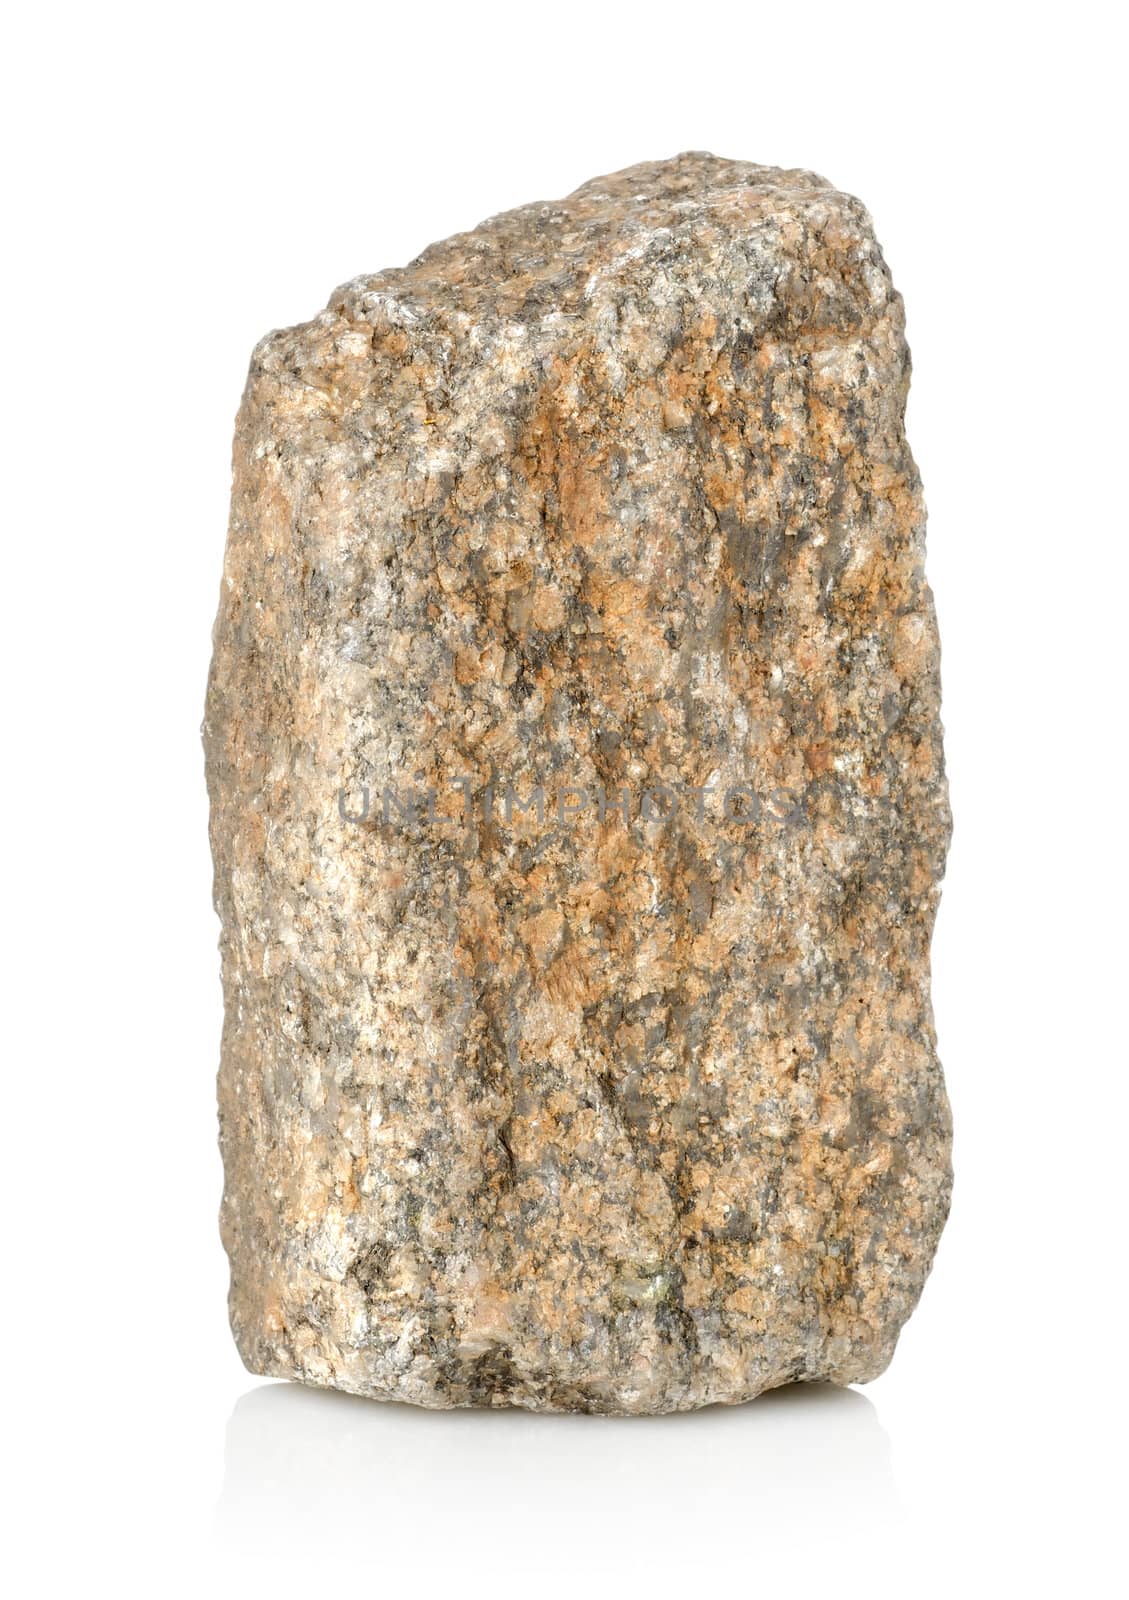 Granite stone isolated on a white background